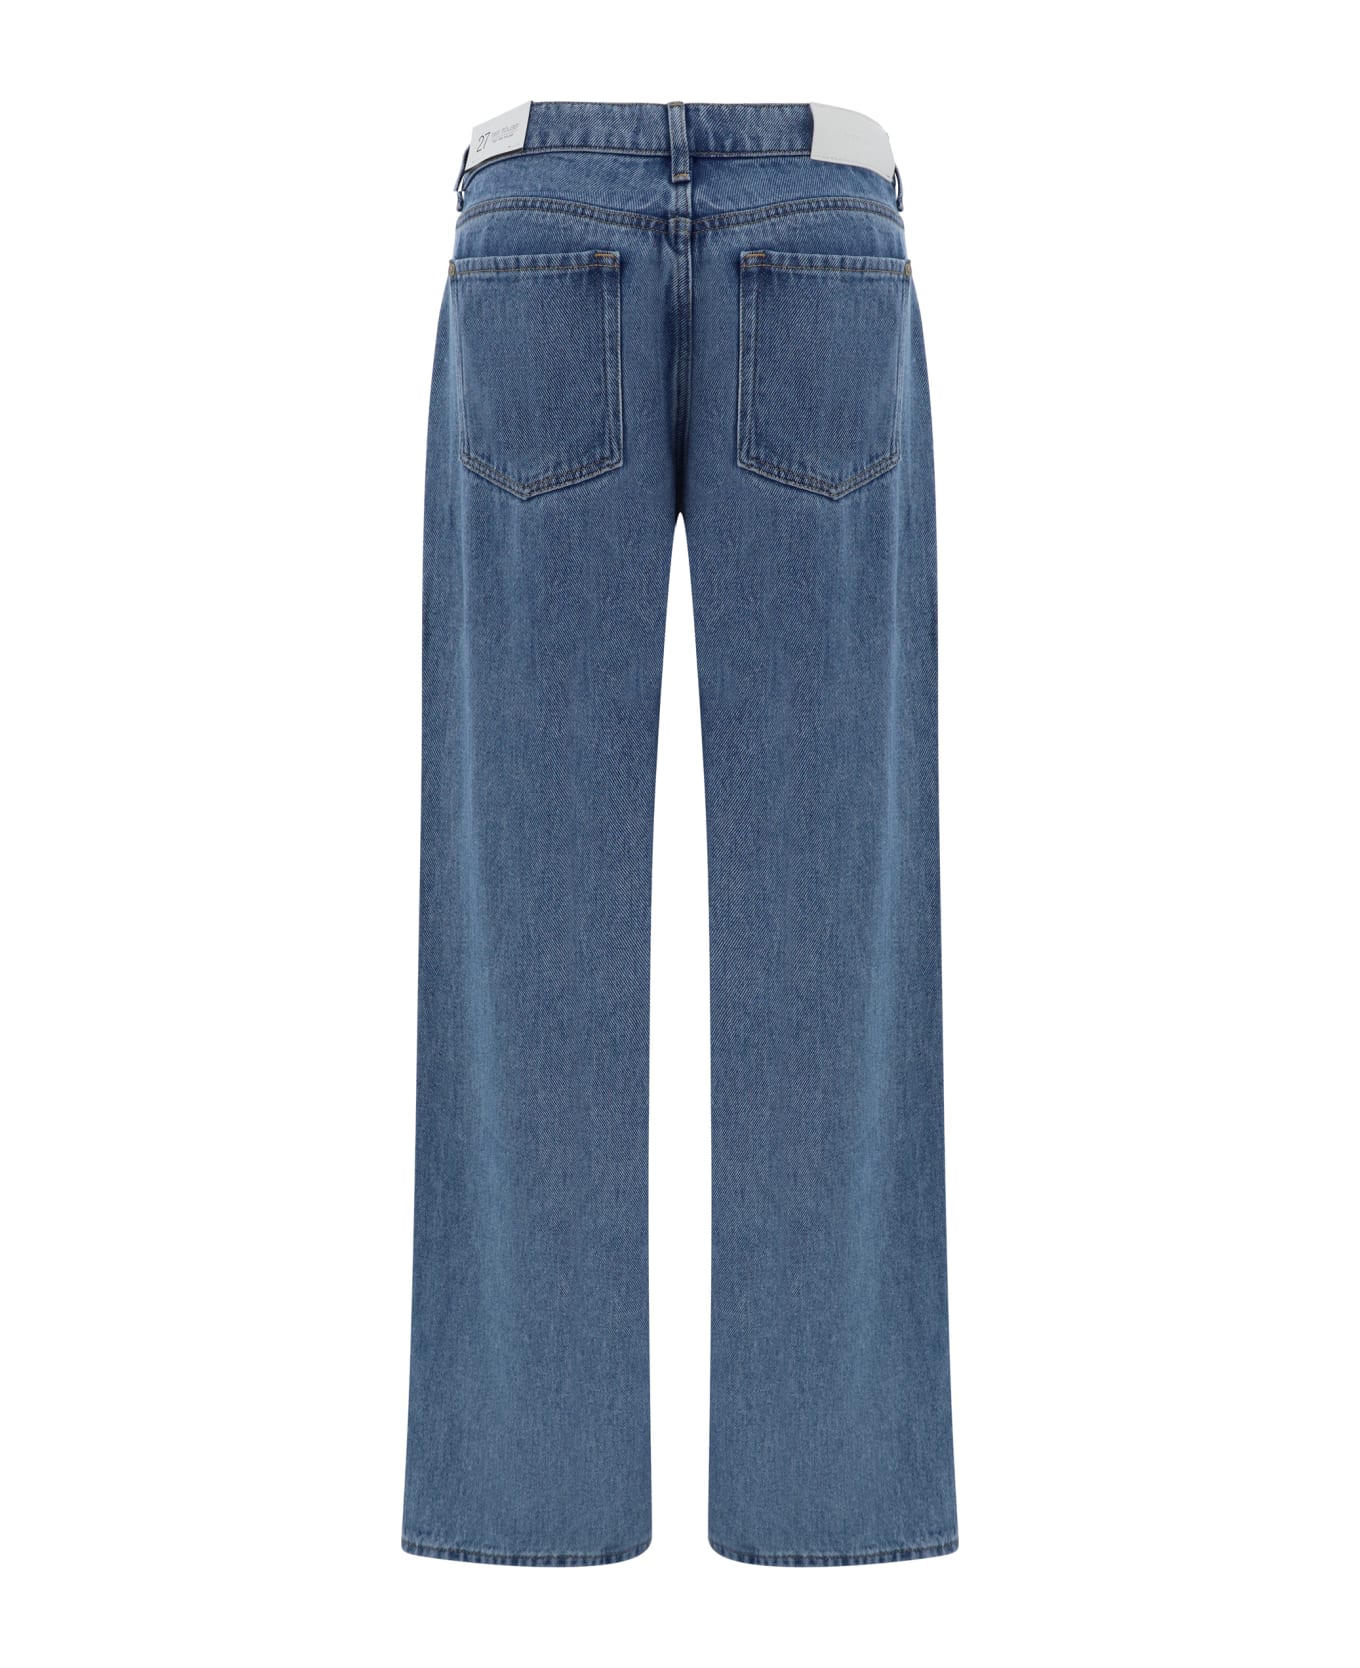 7 For All Mankind Valentine Jeans - Light Blue